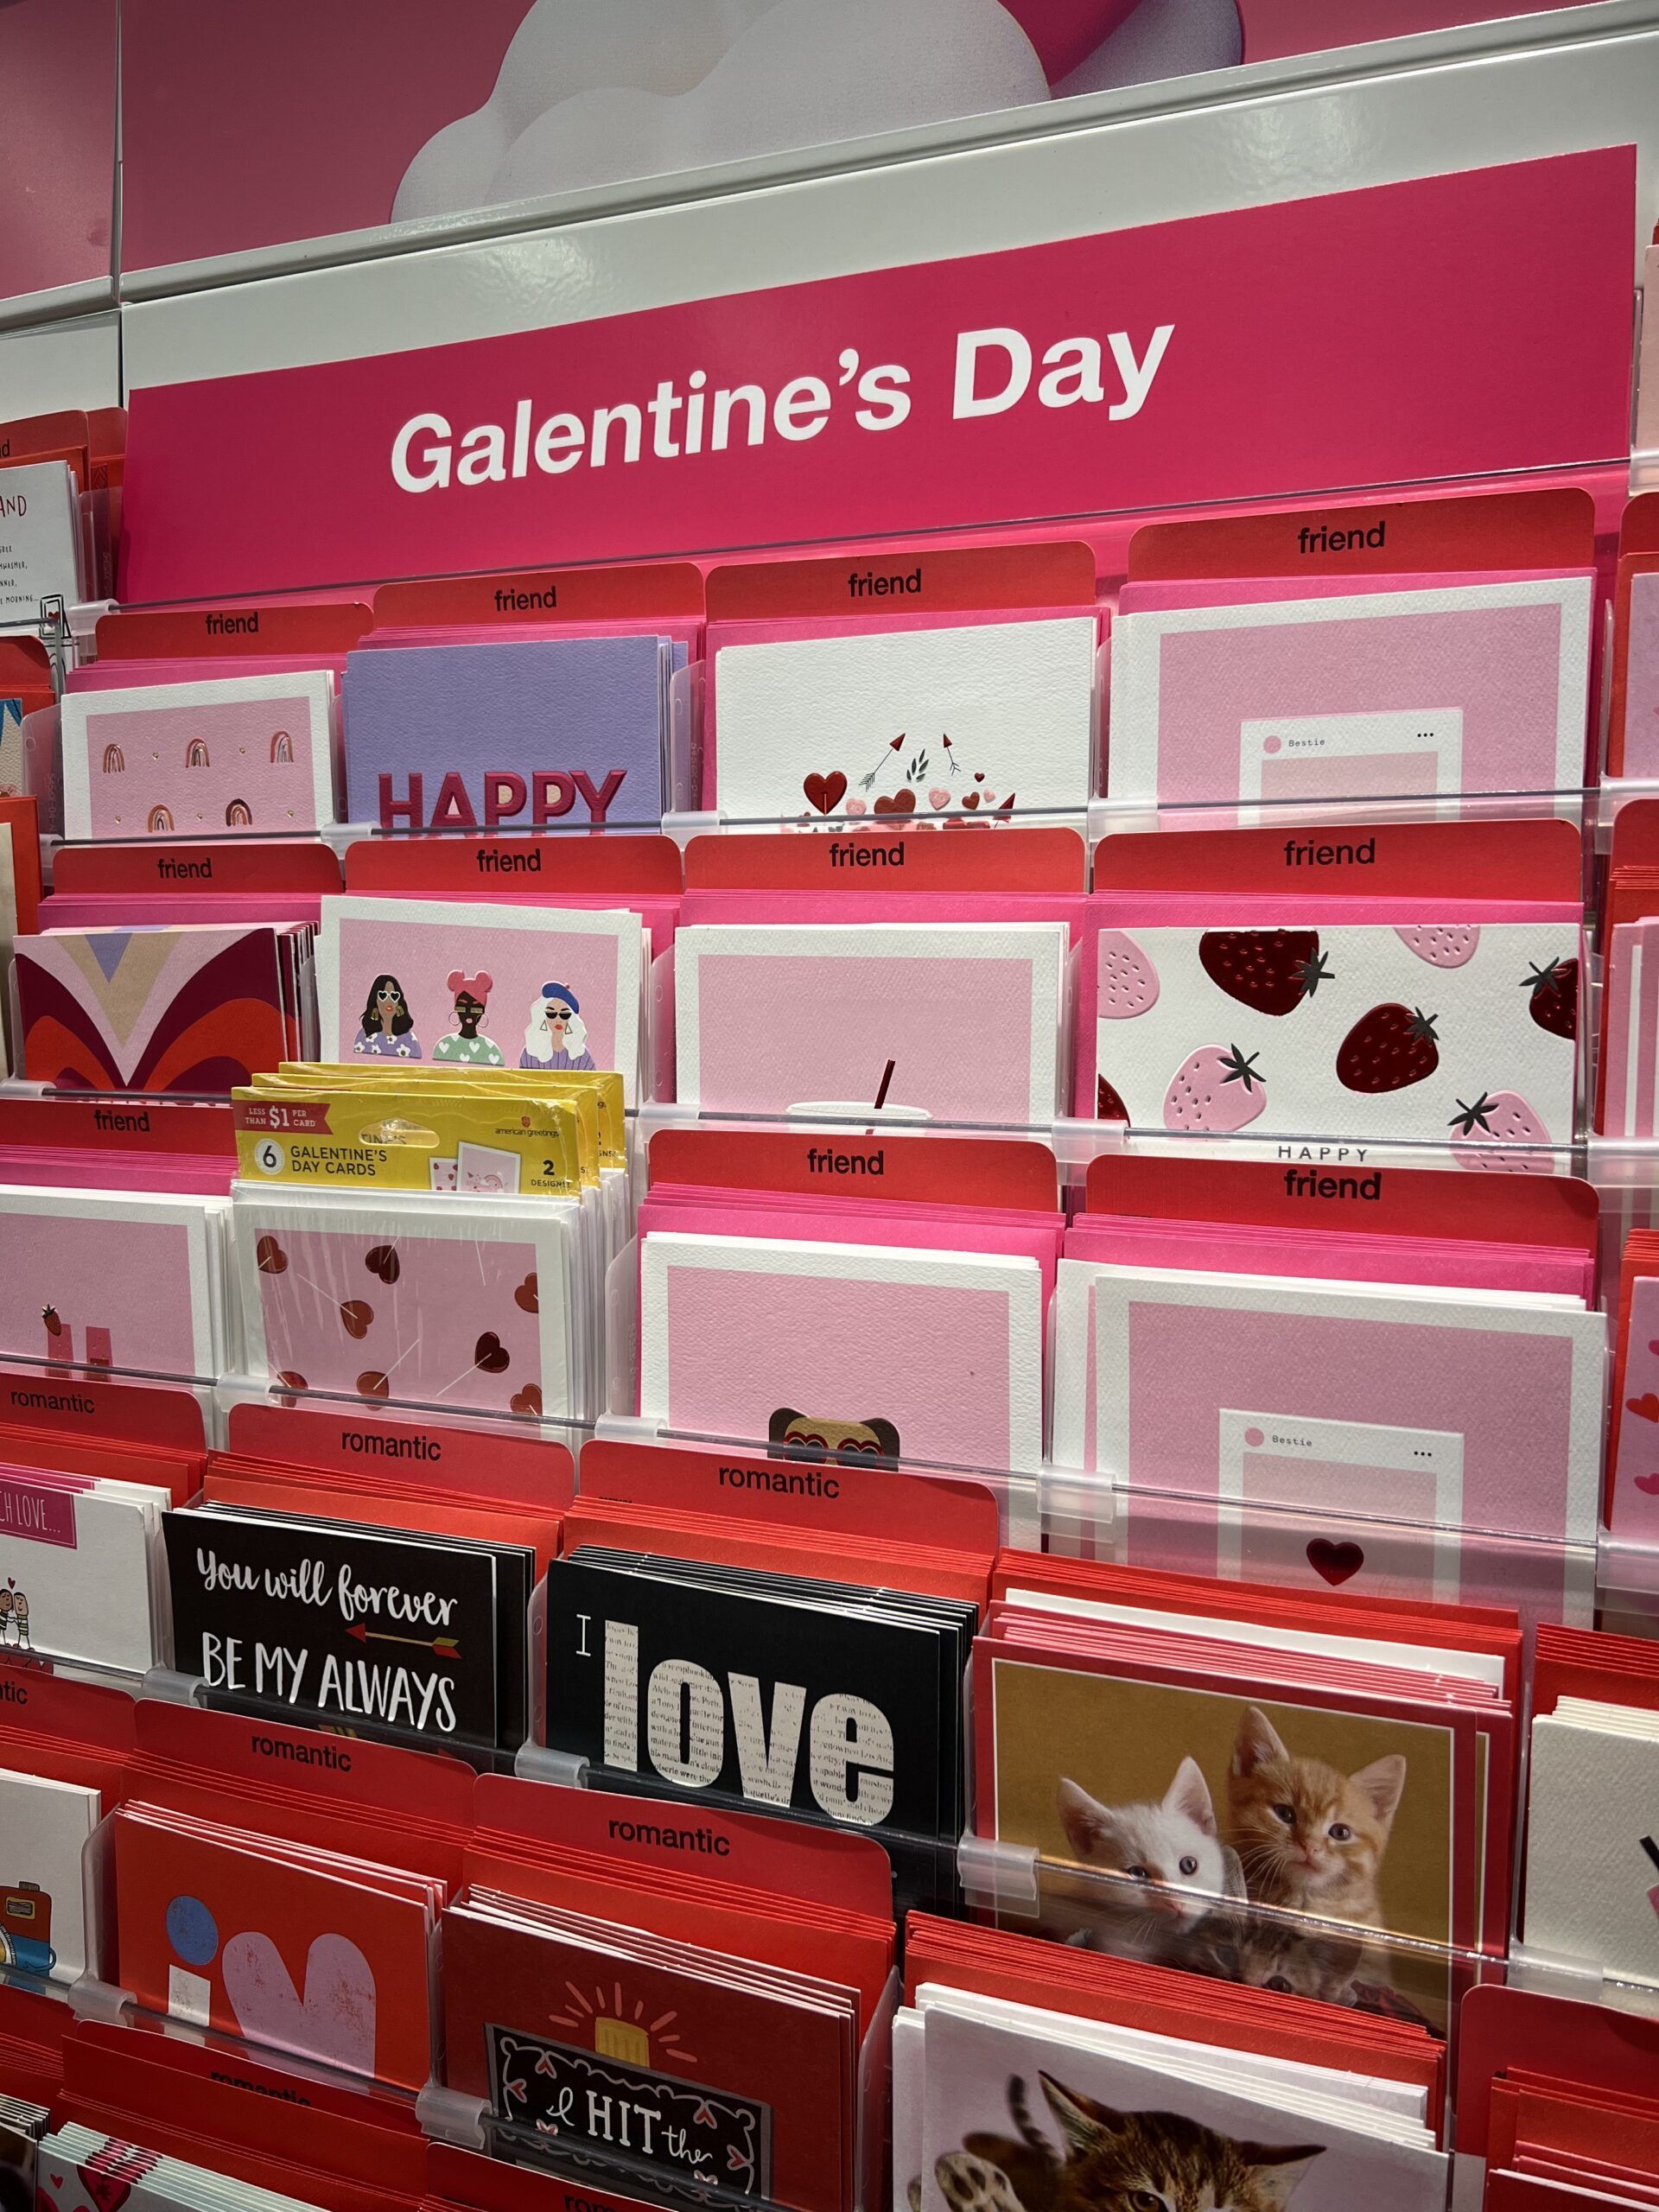 Galentine card display in a store